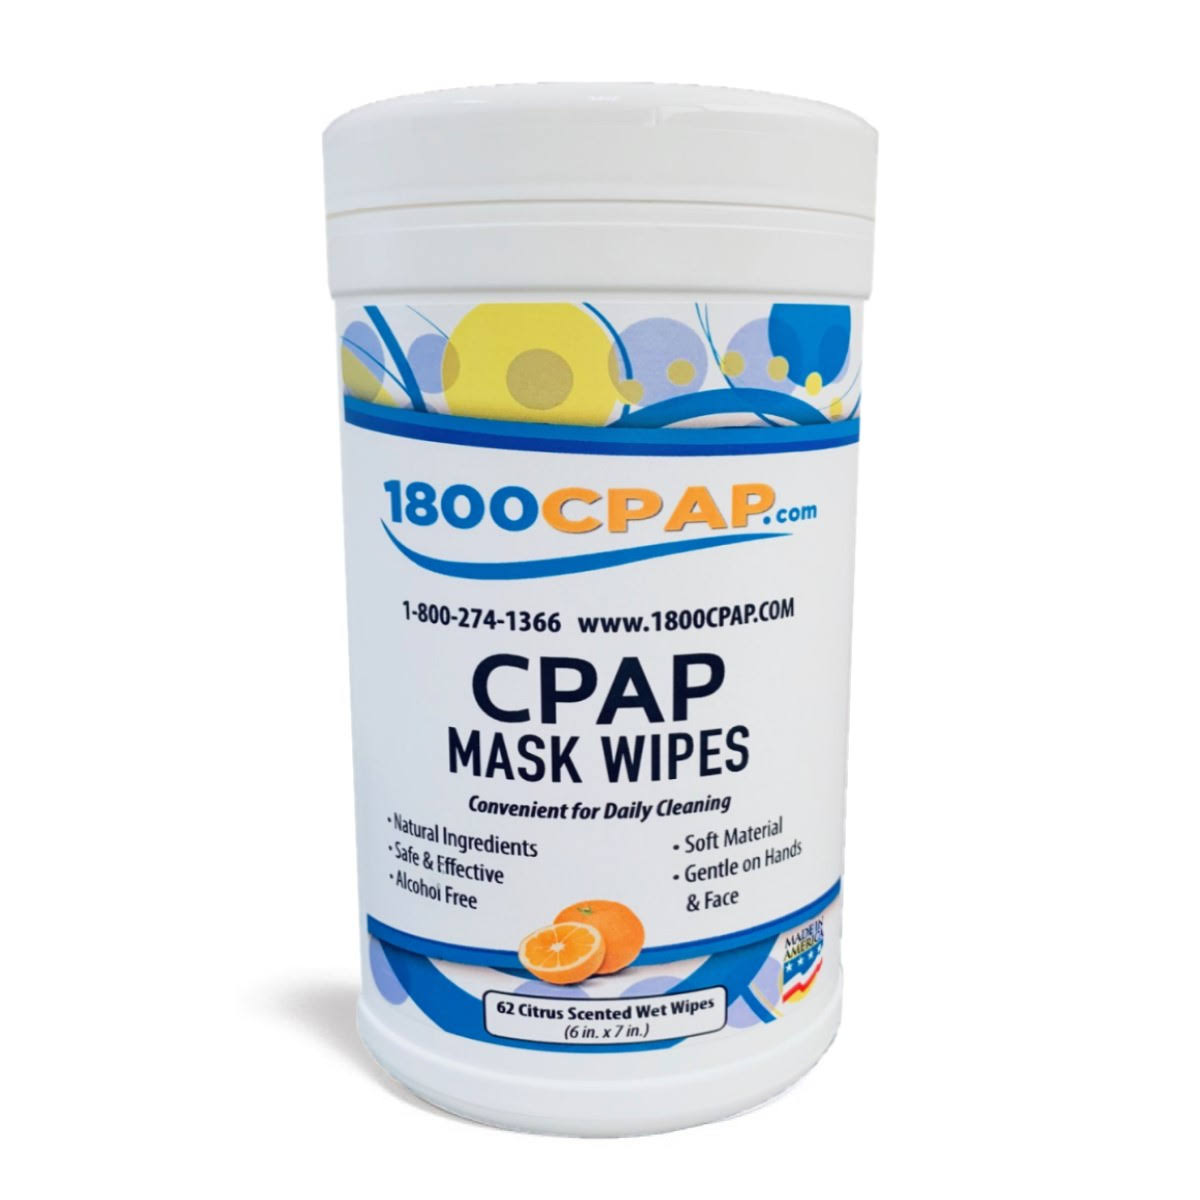 CPAP Cleaning Mask Wipes by 1800CPAP - Unscented